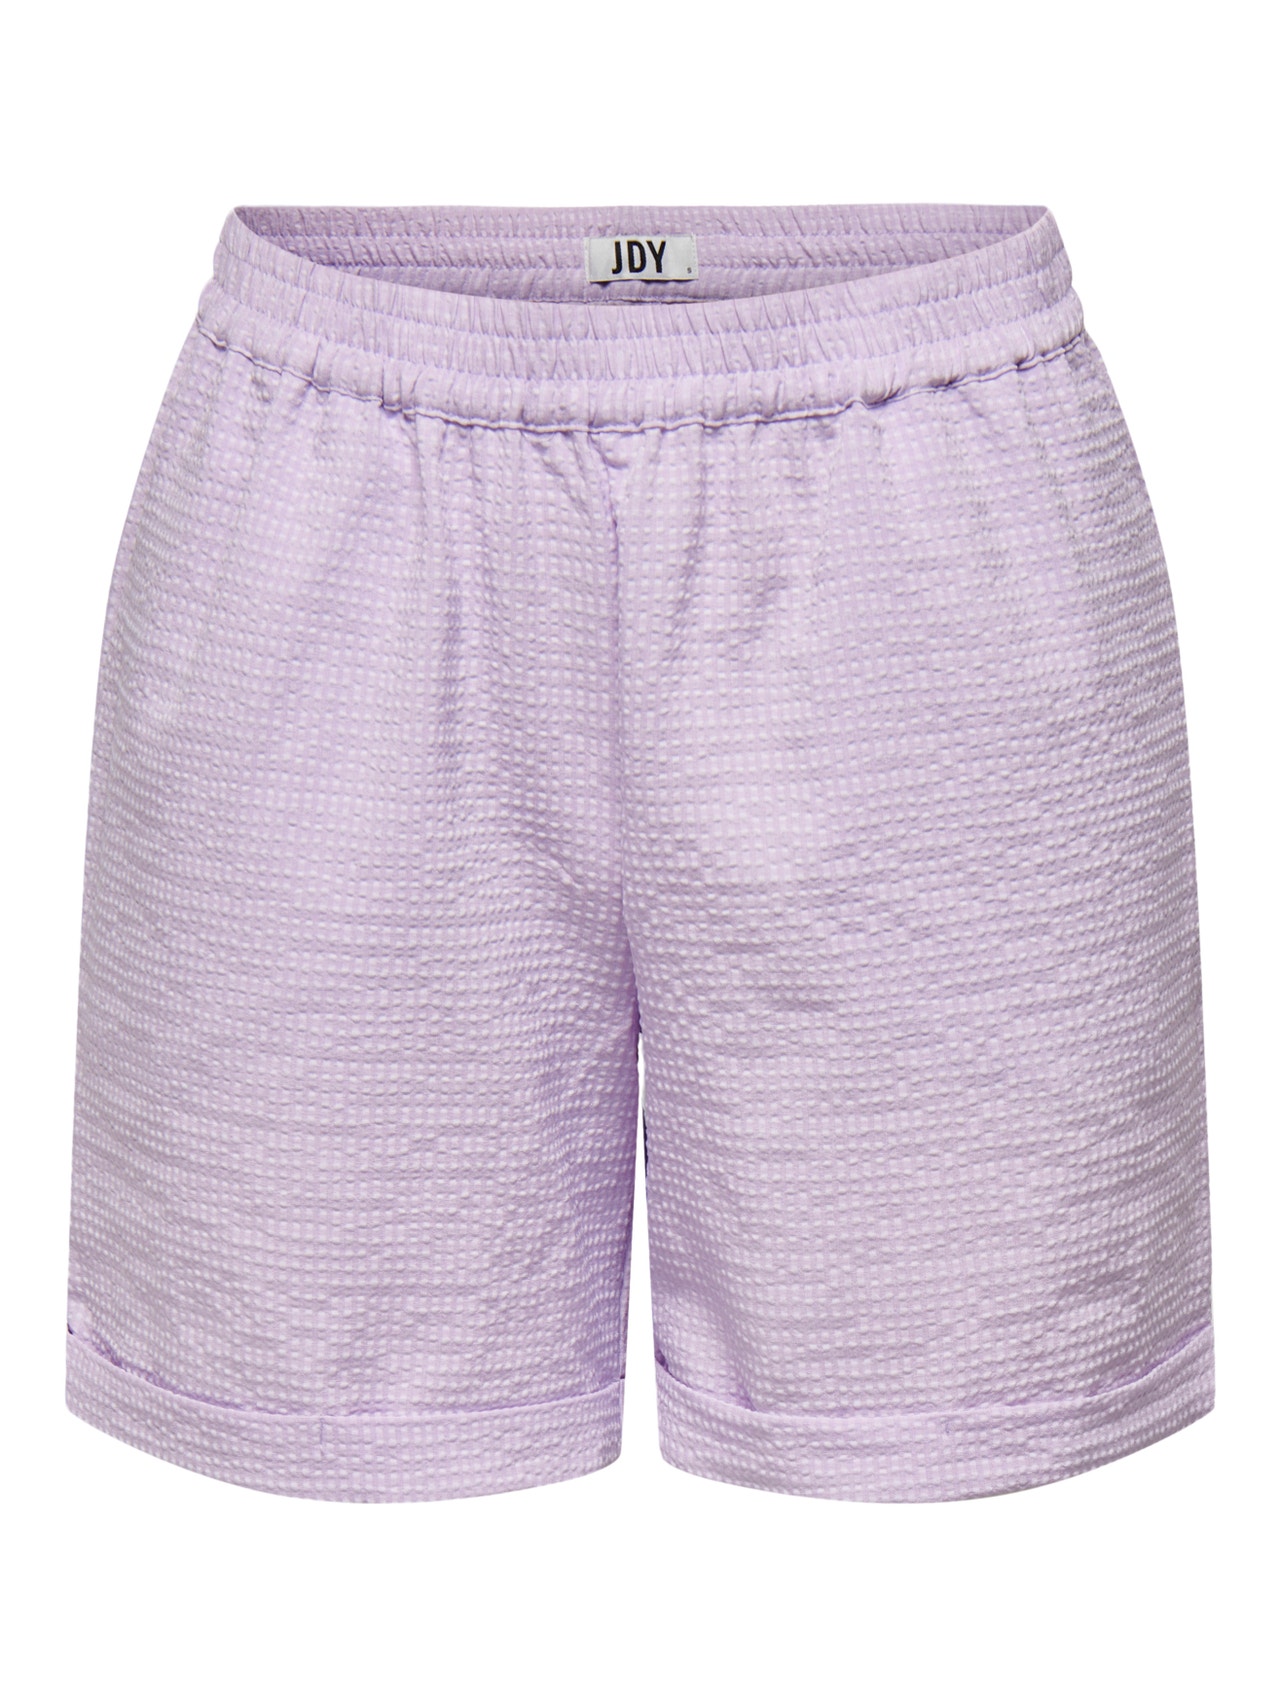 ONLY Shorts Corte regular -Orchid Bloom - 15283120